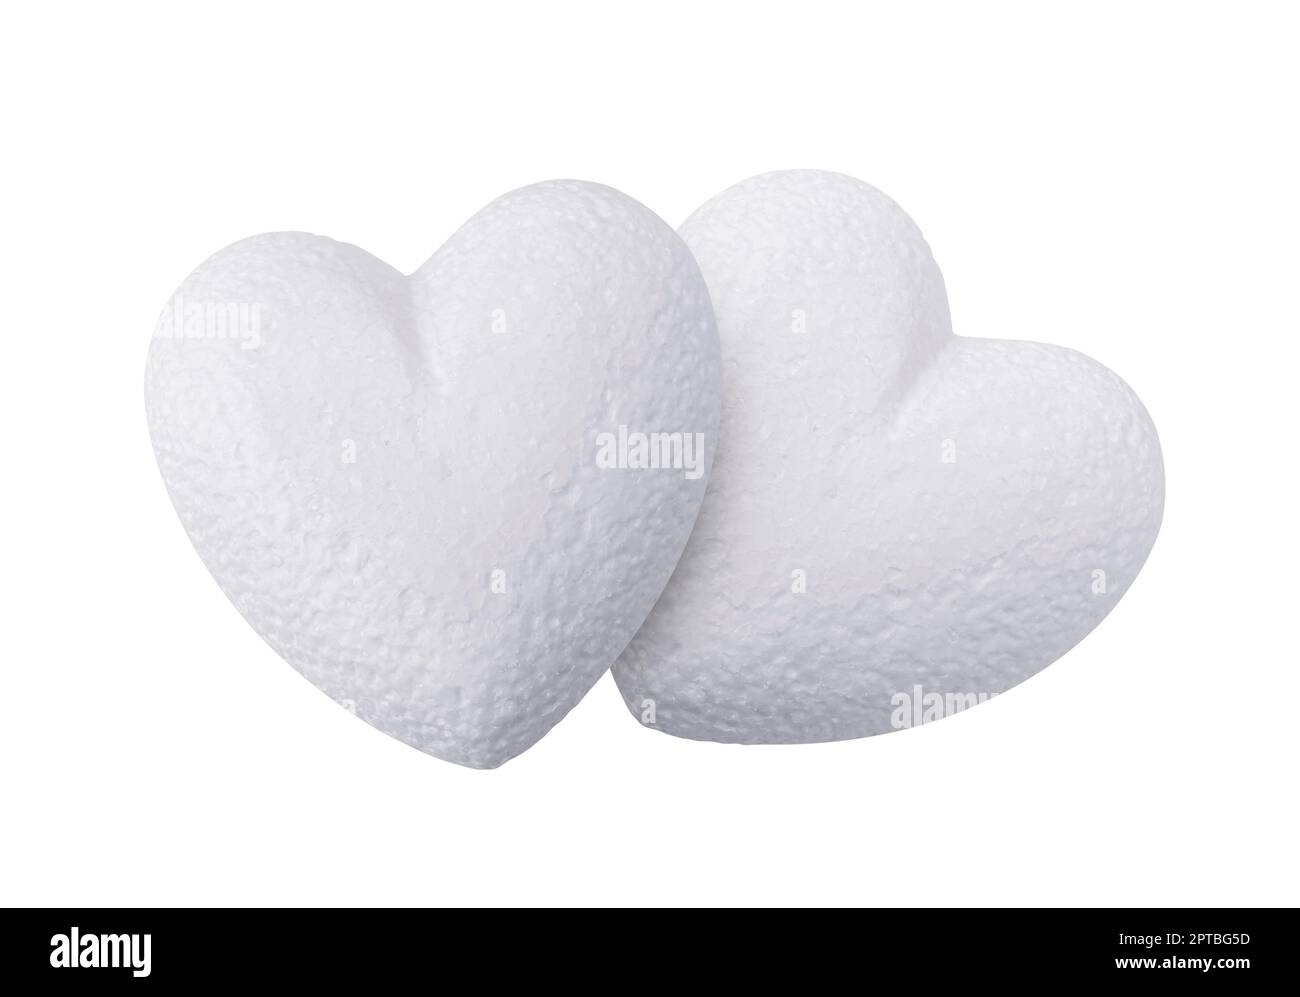 Background With White Styrofoam Hearts On A Red Backdrop Stock Photo -  Download Image Now - iStock